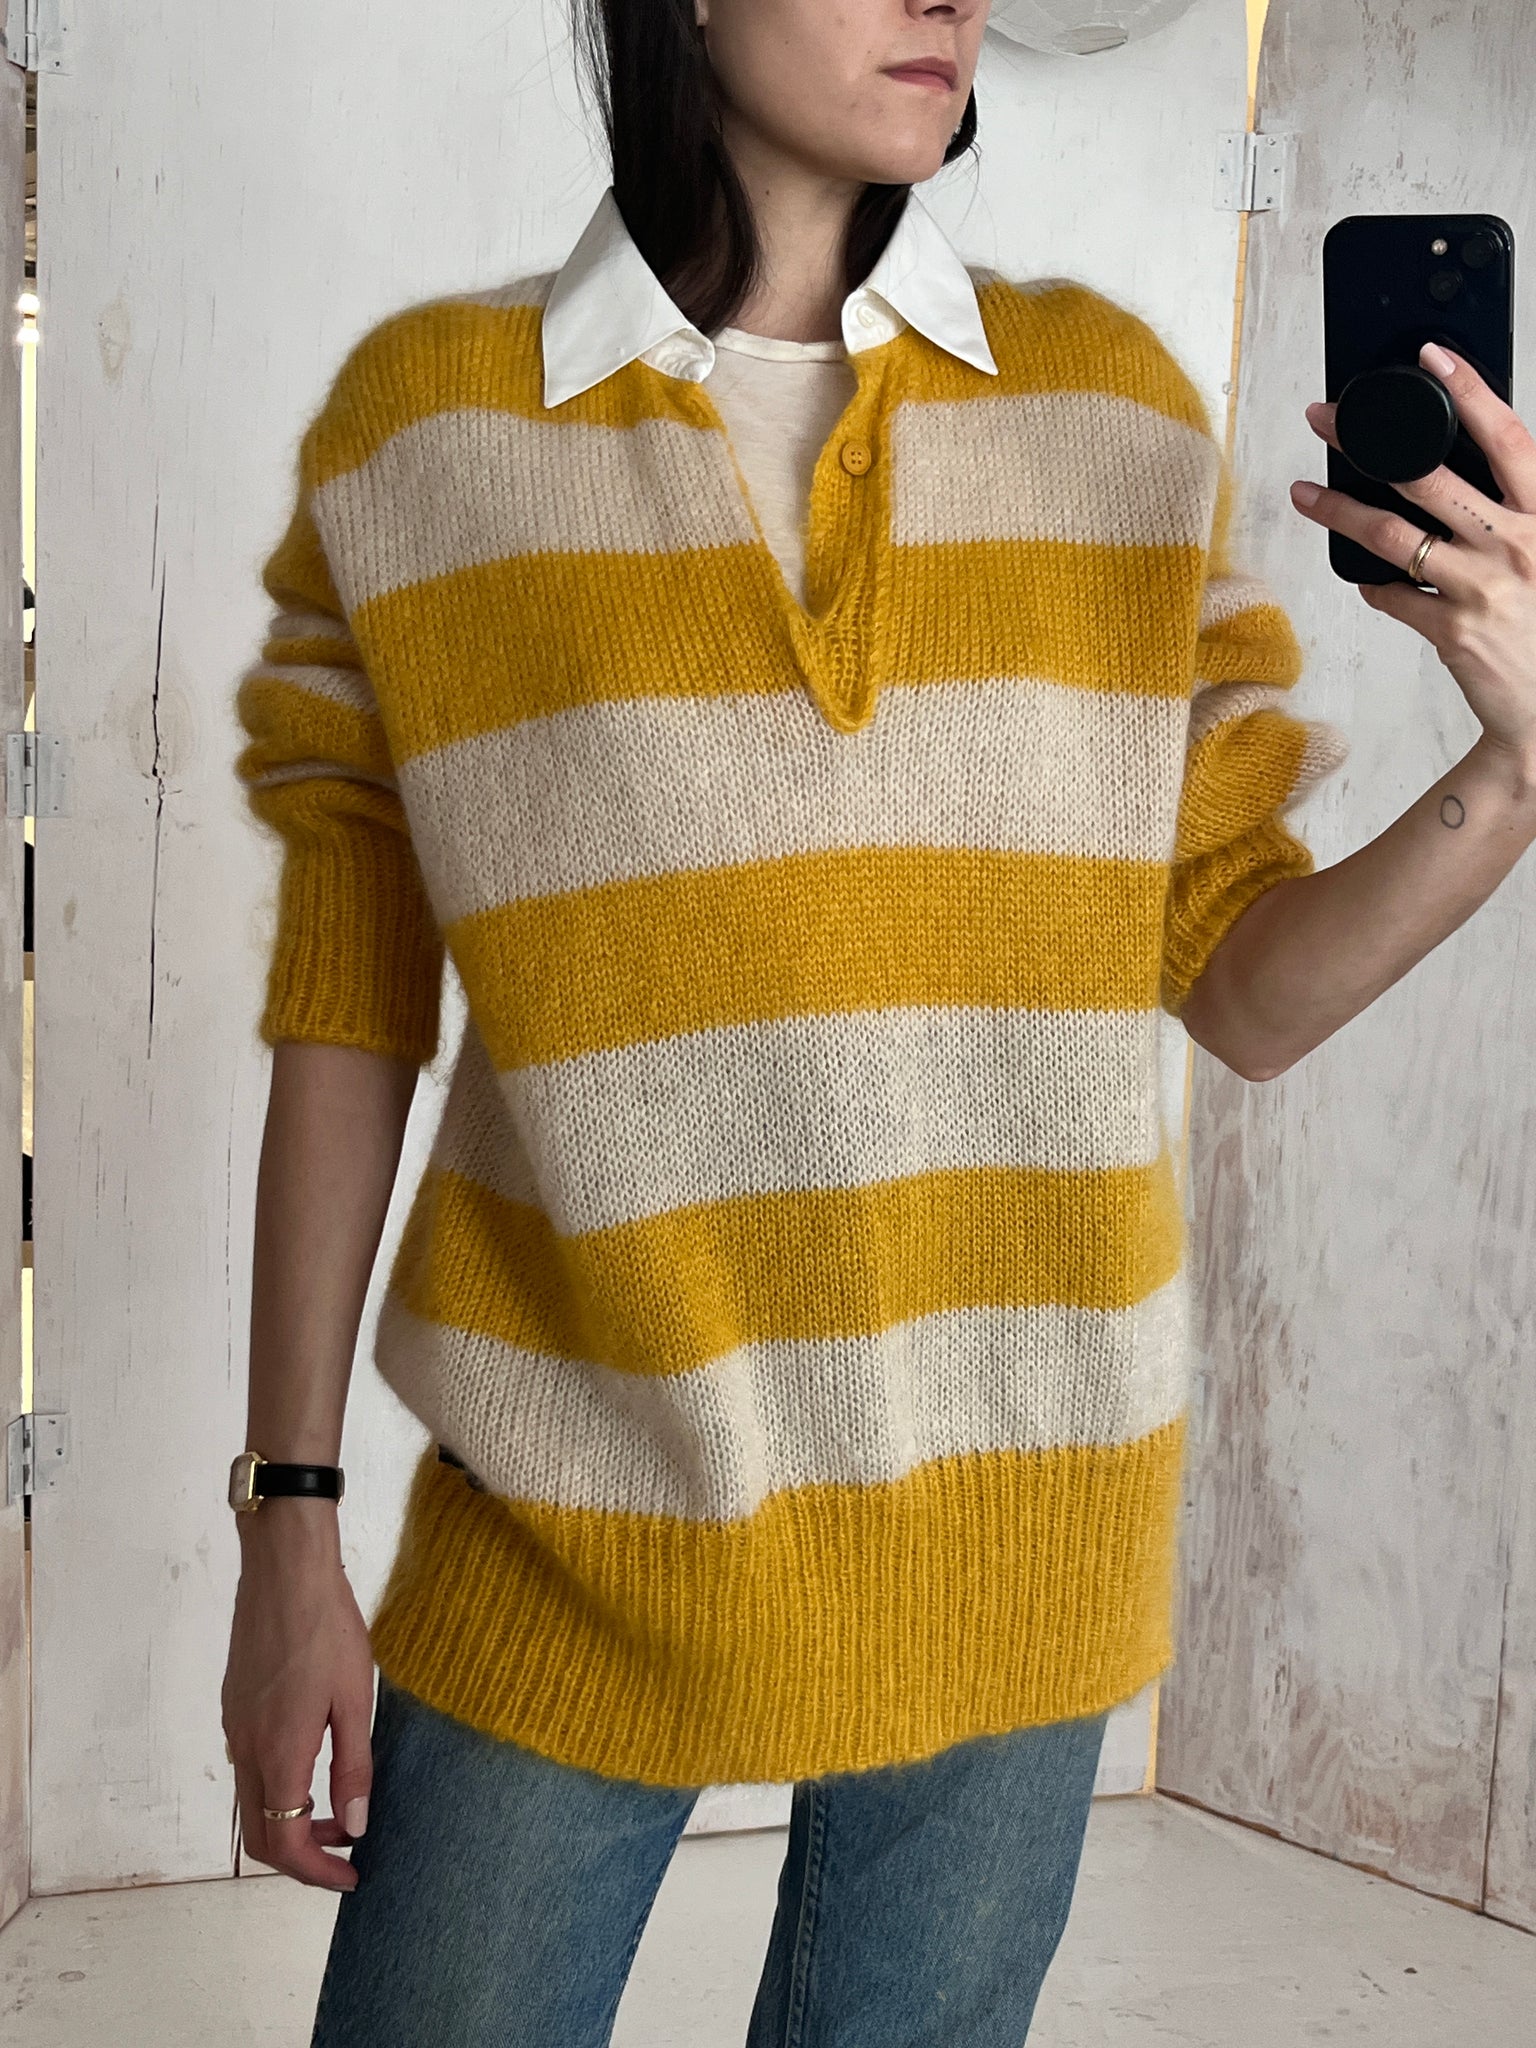 Unisex Fendi Striped Yellow and Cream Mohair Sweater with Collar